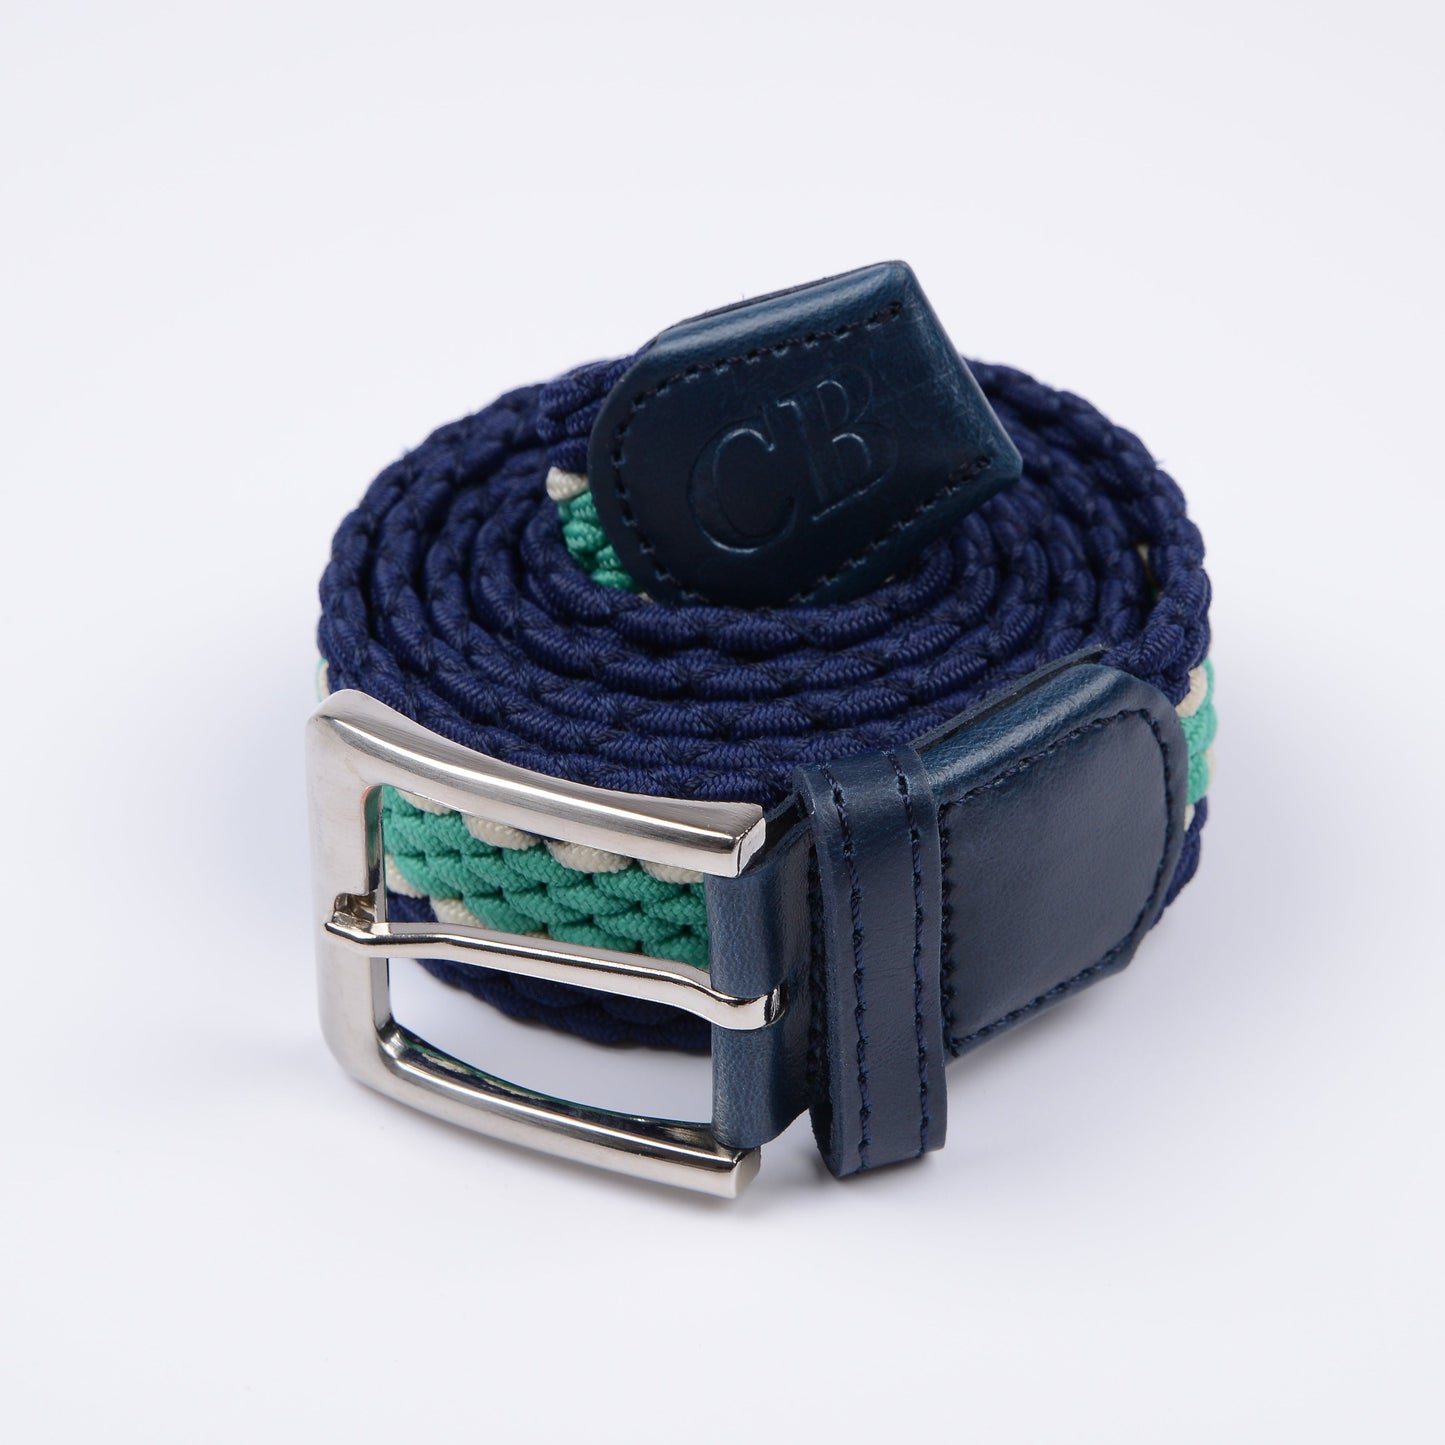 Men's Woven Stretch Belt in Navy, Green and Thin White Stripe